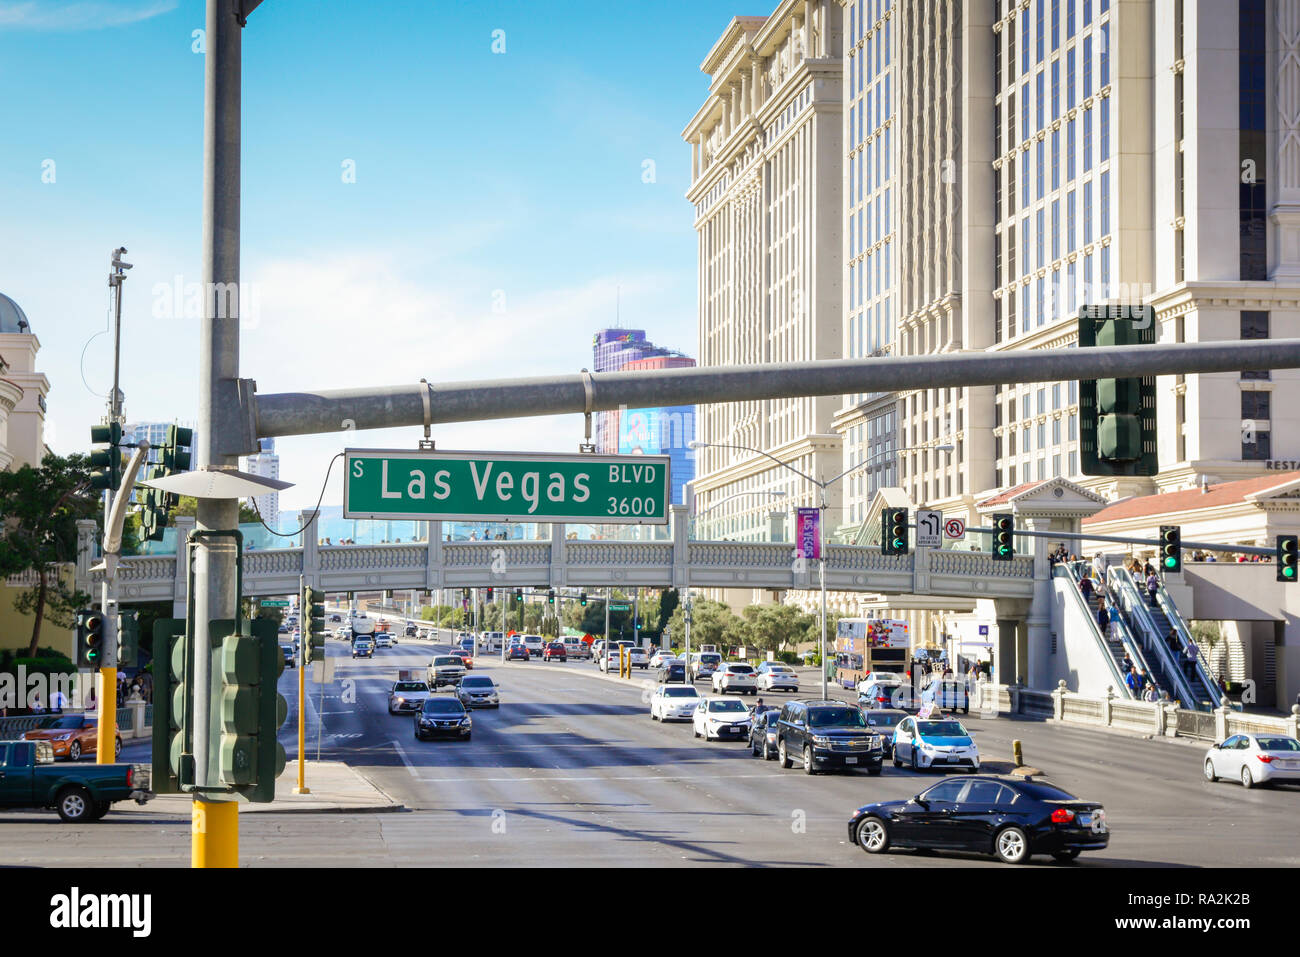 Street Sign for Las Vegas Blvd, known as the Las Vegas Strip, in Las Vegas, NV with hotels and casinos lining the strip along with pedestrian bridges  Stock Photo